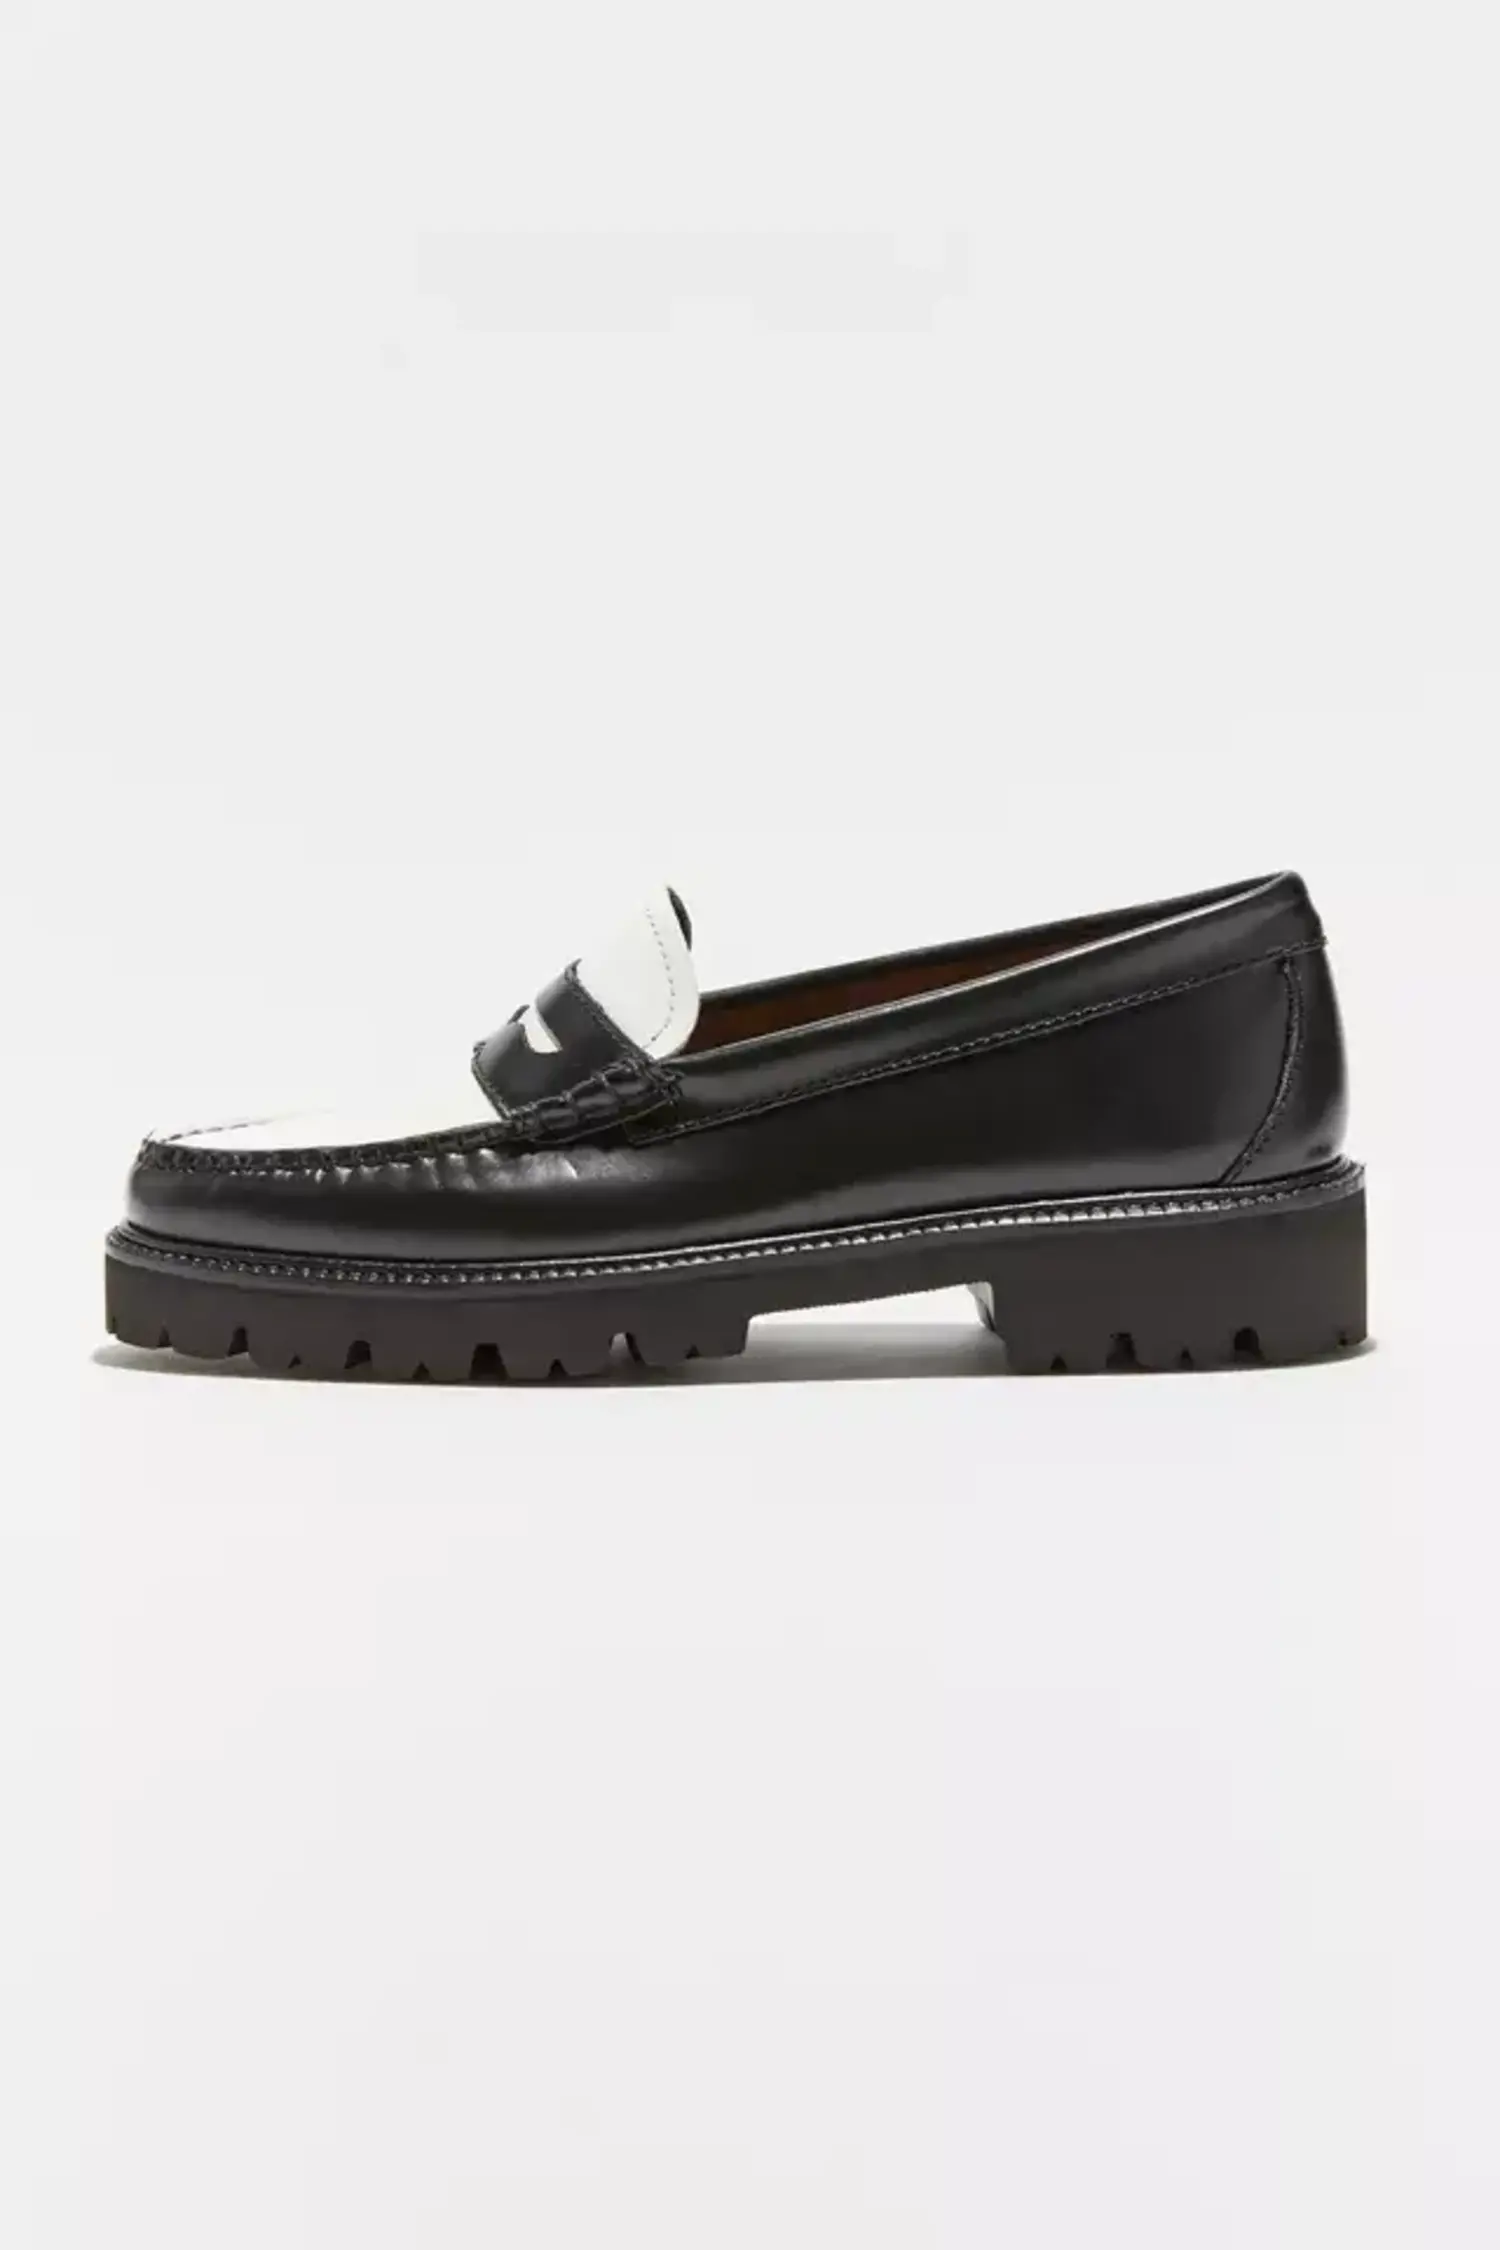 G.H. Bass | Whitney Super Lug Loafer Black/White - Tryst Boutique